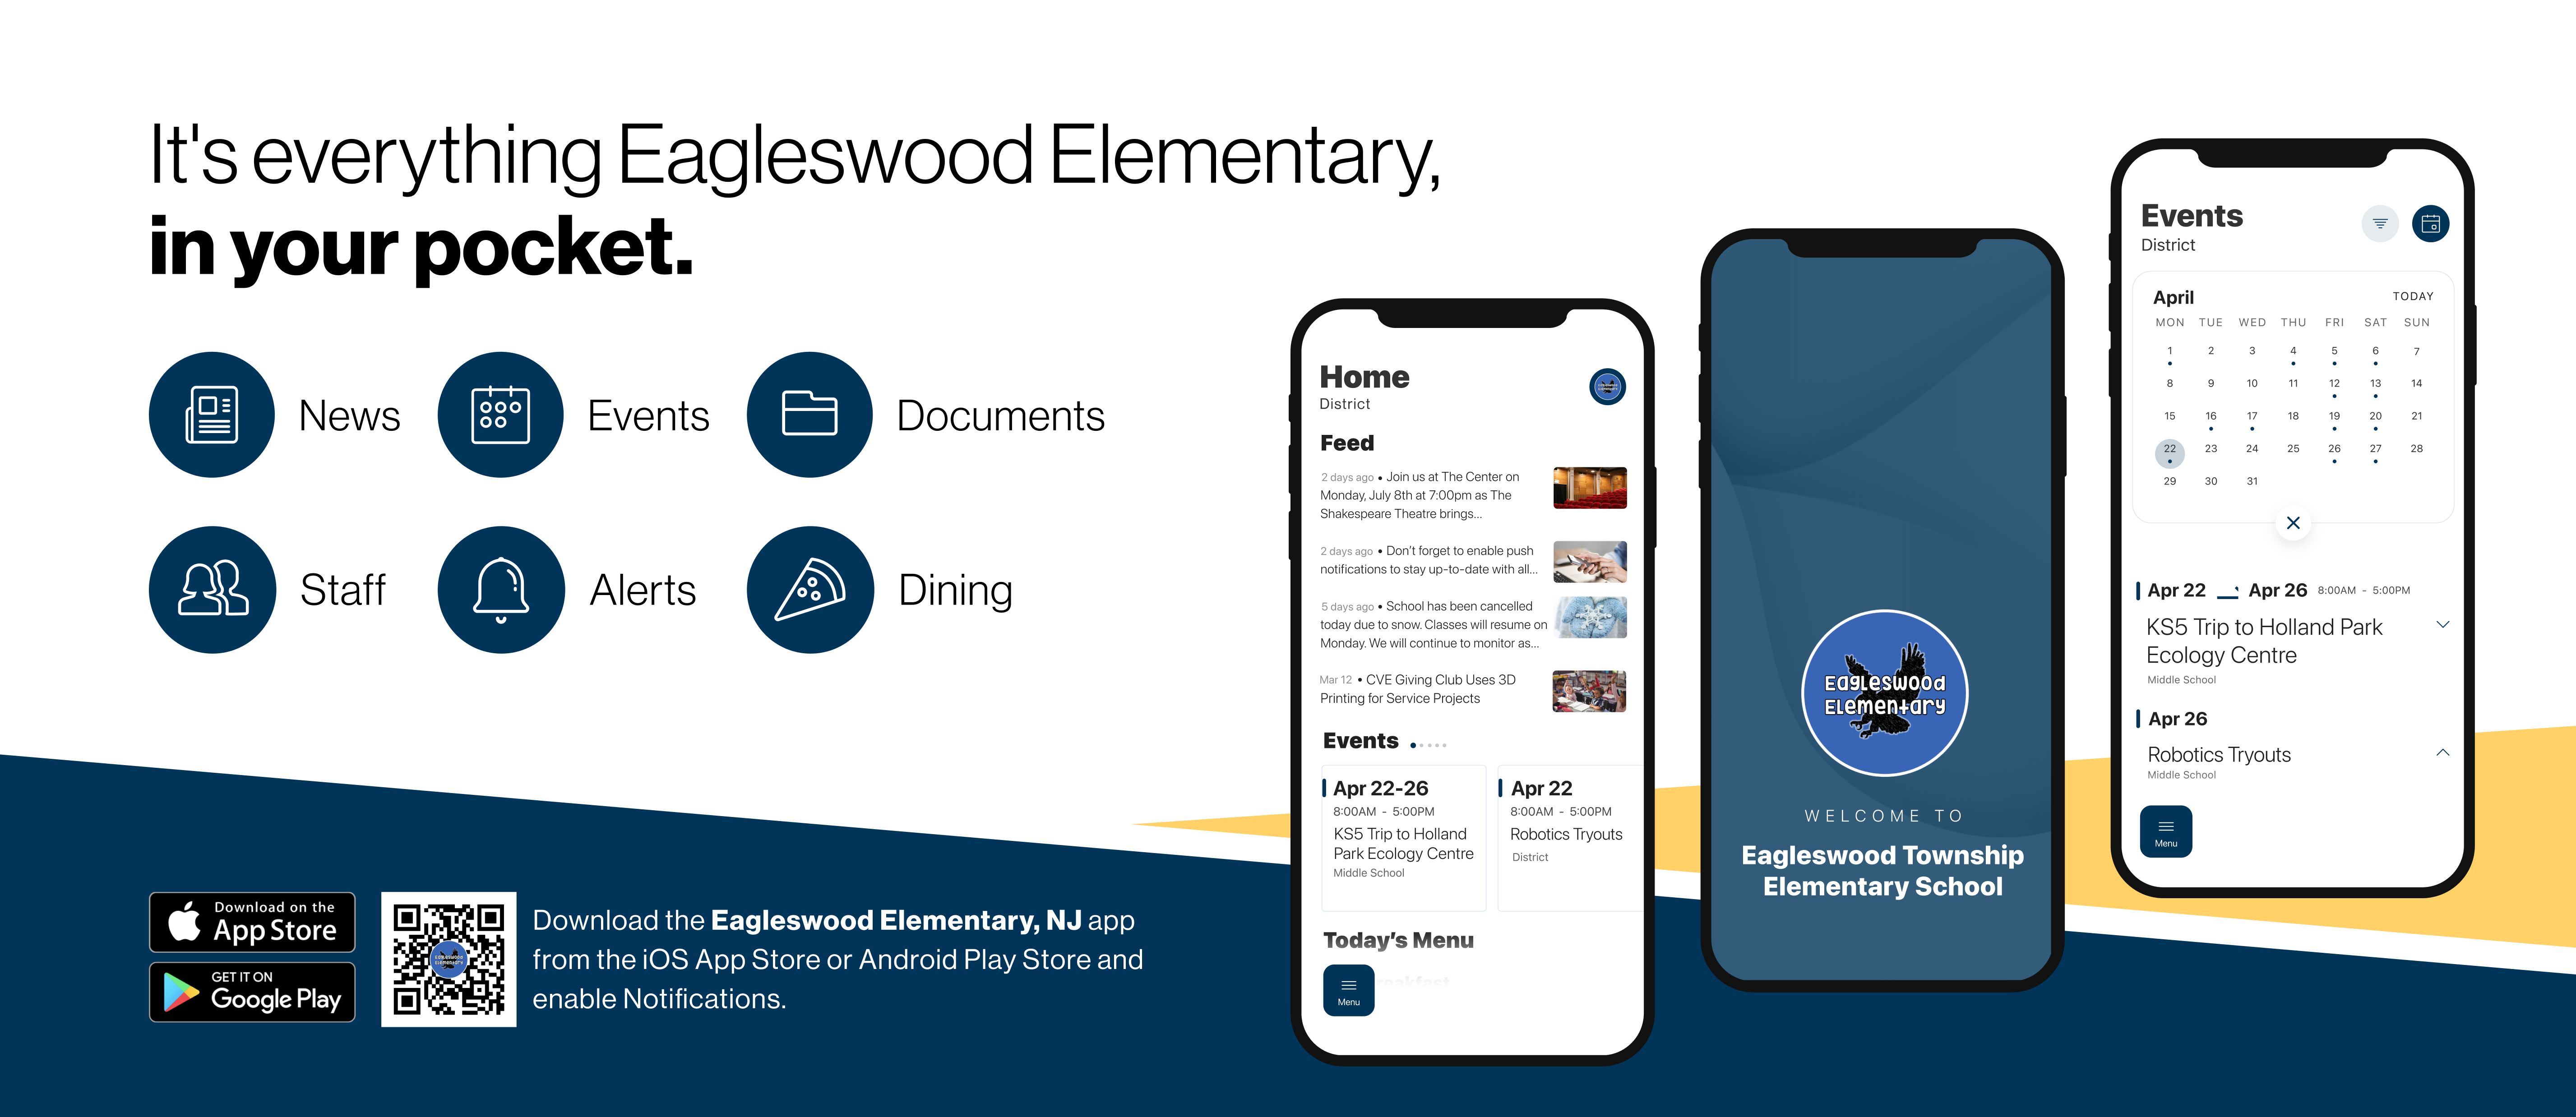 It’s everything Eagleswood Elementary, in your pocket.